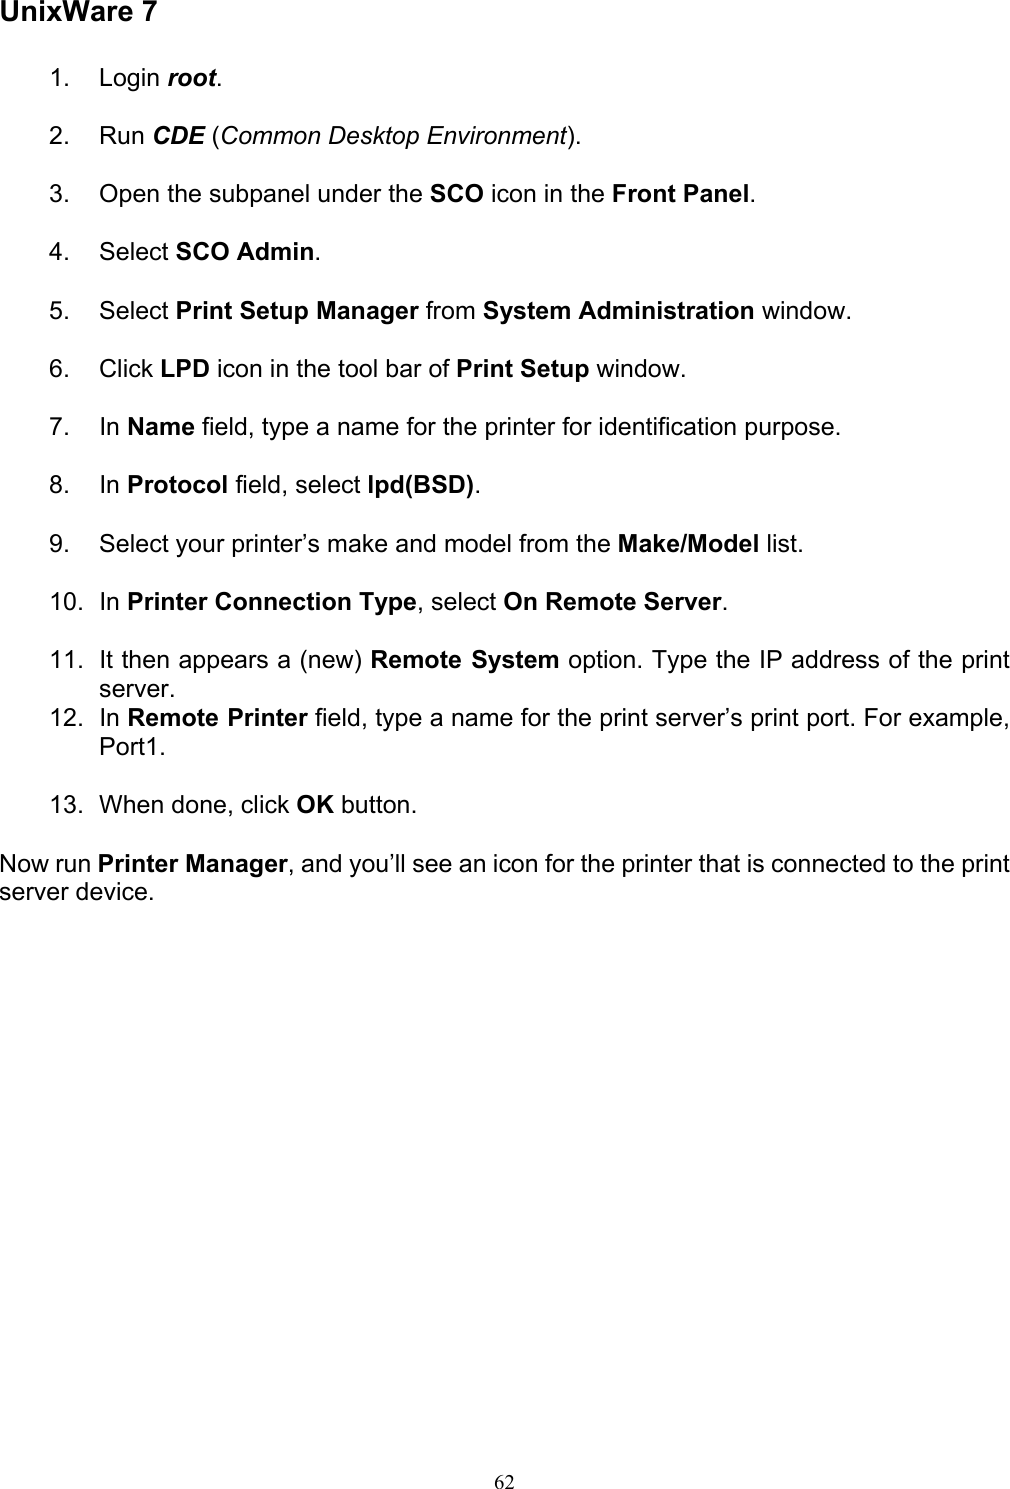   62 UnixWare 7 1. Login root.  2. Run CDE (Common Desktop Environment).  3.  Open the subpanel under the SCO icon in the Front Panel.  4. Select SCO Admin.  5. Select Print Setup Manager from System Administration window.  6. Click LPD icon in the tool bar of Print Setup window.  7. In Name field, type a name for the printer for identification purpose.  8. In Protocol field, select lpd(BSD).  9.  Select your printer’s make and model from the Make/Model list.  10. In Printer Connection Type, select On Remote Server.  11.  It then appears a (new) Remote System option. Type the IP address of the print server. 12. In Remote Printer field, type a name for the print server’s print port. For example, Port1.  13.  When done, click OK button.  Now run Printer Manager, and you’ll see an icon for the printer that is connected to the print server device.              